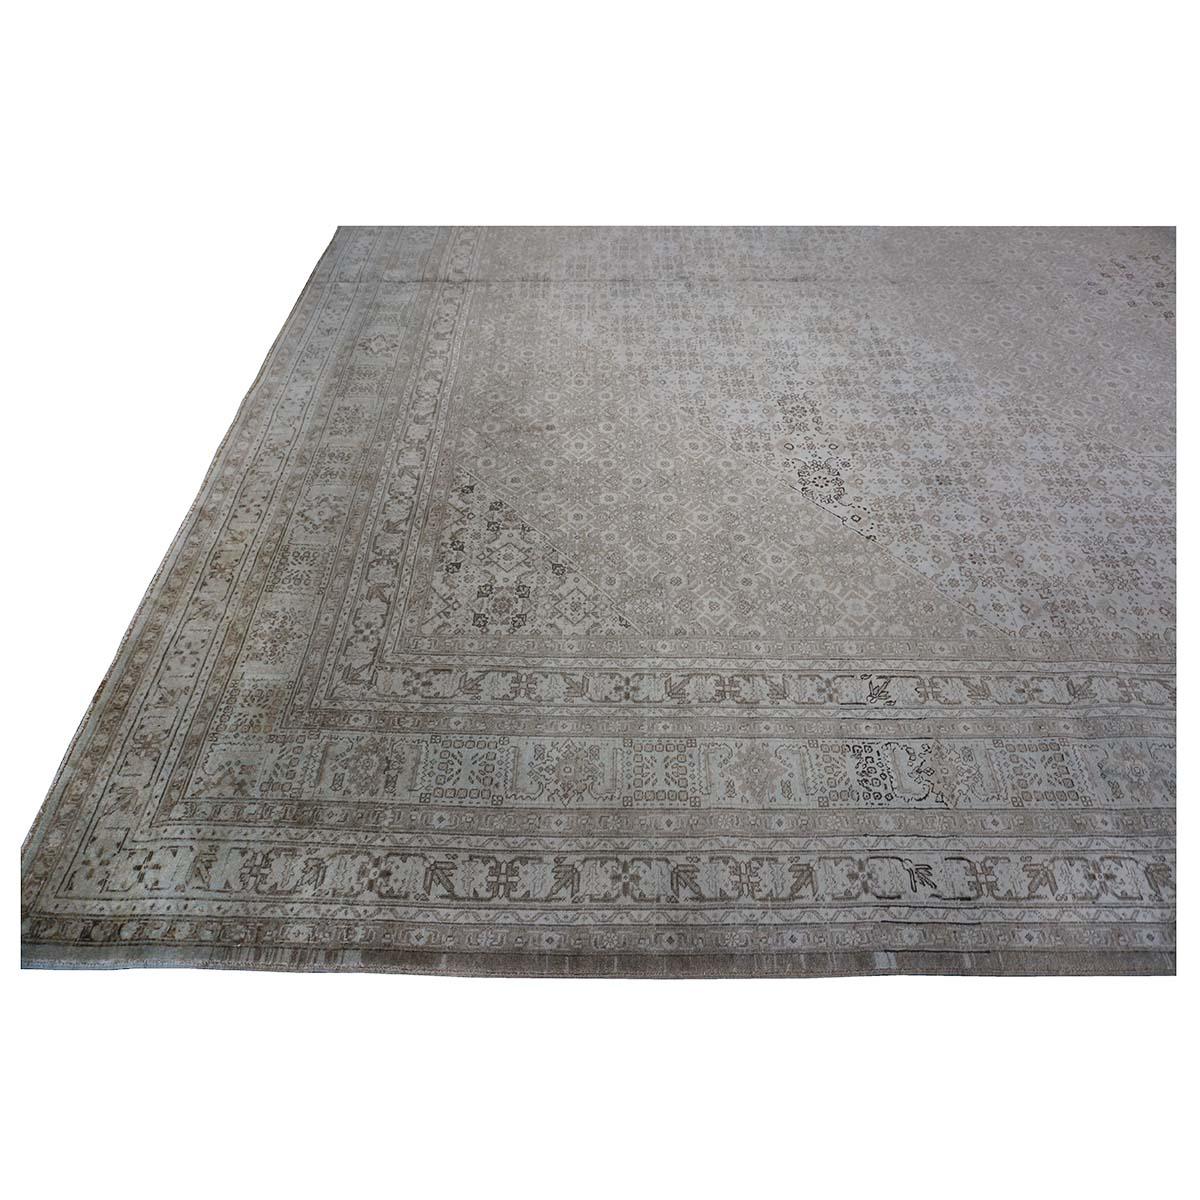 Antique Shabby Chic Distressed Persian Tabriz 13x18 Ivory & Tan Handmade Rug For Sale 8